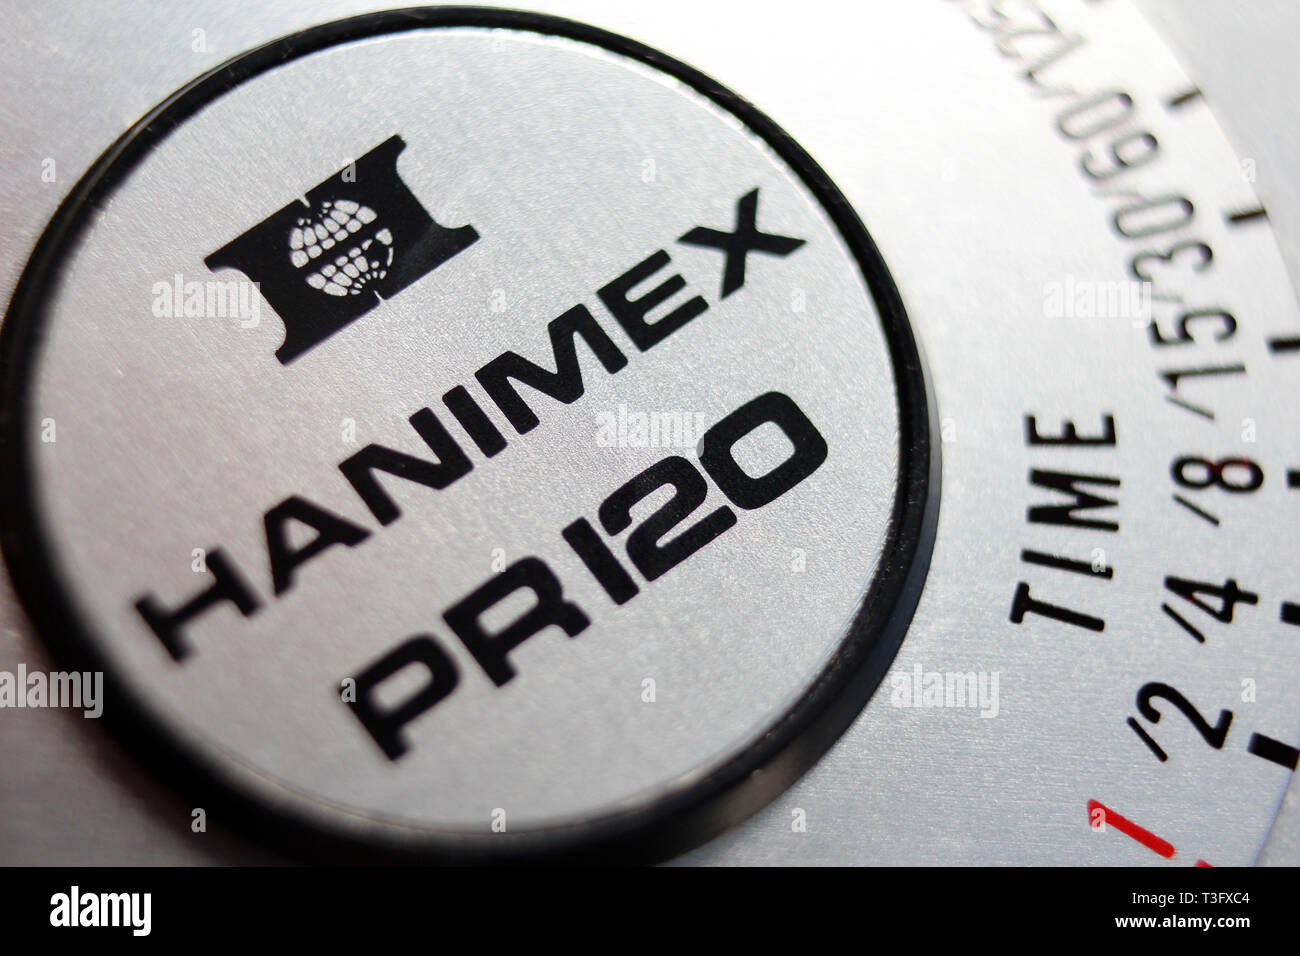 Detail from vintage photographic light meter Hanimex PR-120 made in Japan. Stock Photo